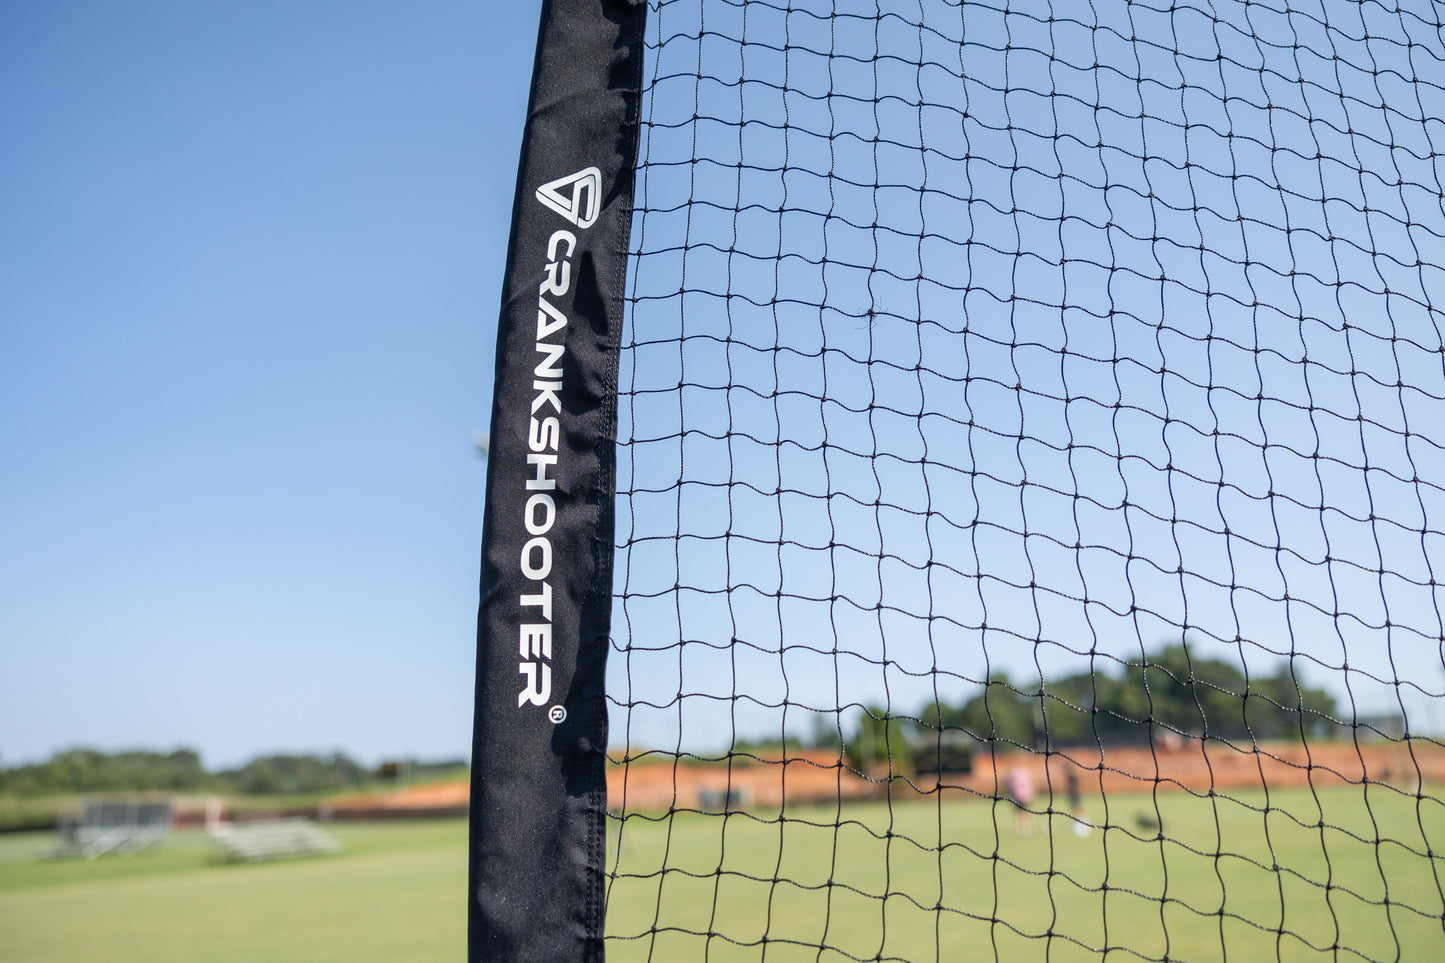 Pop-Up Backstop 21' x 11', Set up/Take Down in 3 minutes, By Crankshooter®, 100% Guaranteed Performance, FREE SHIPPING